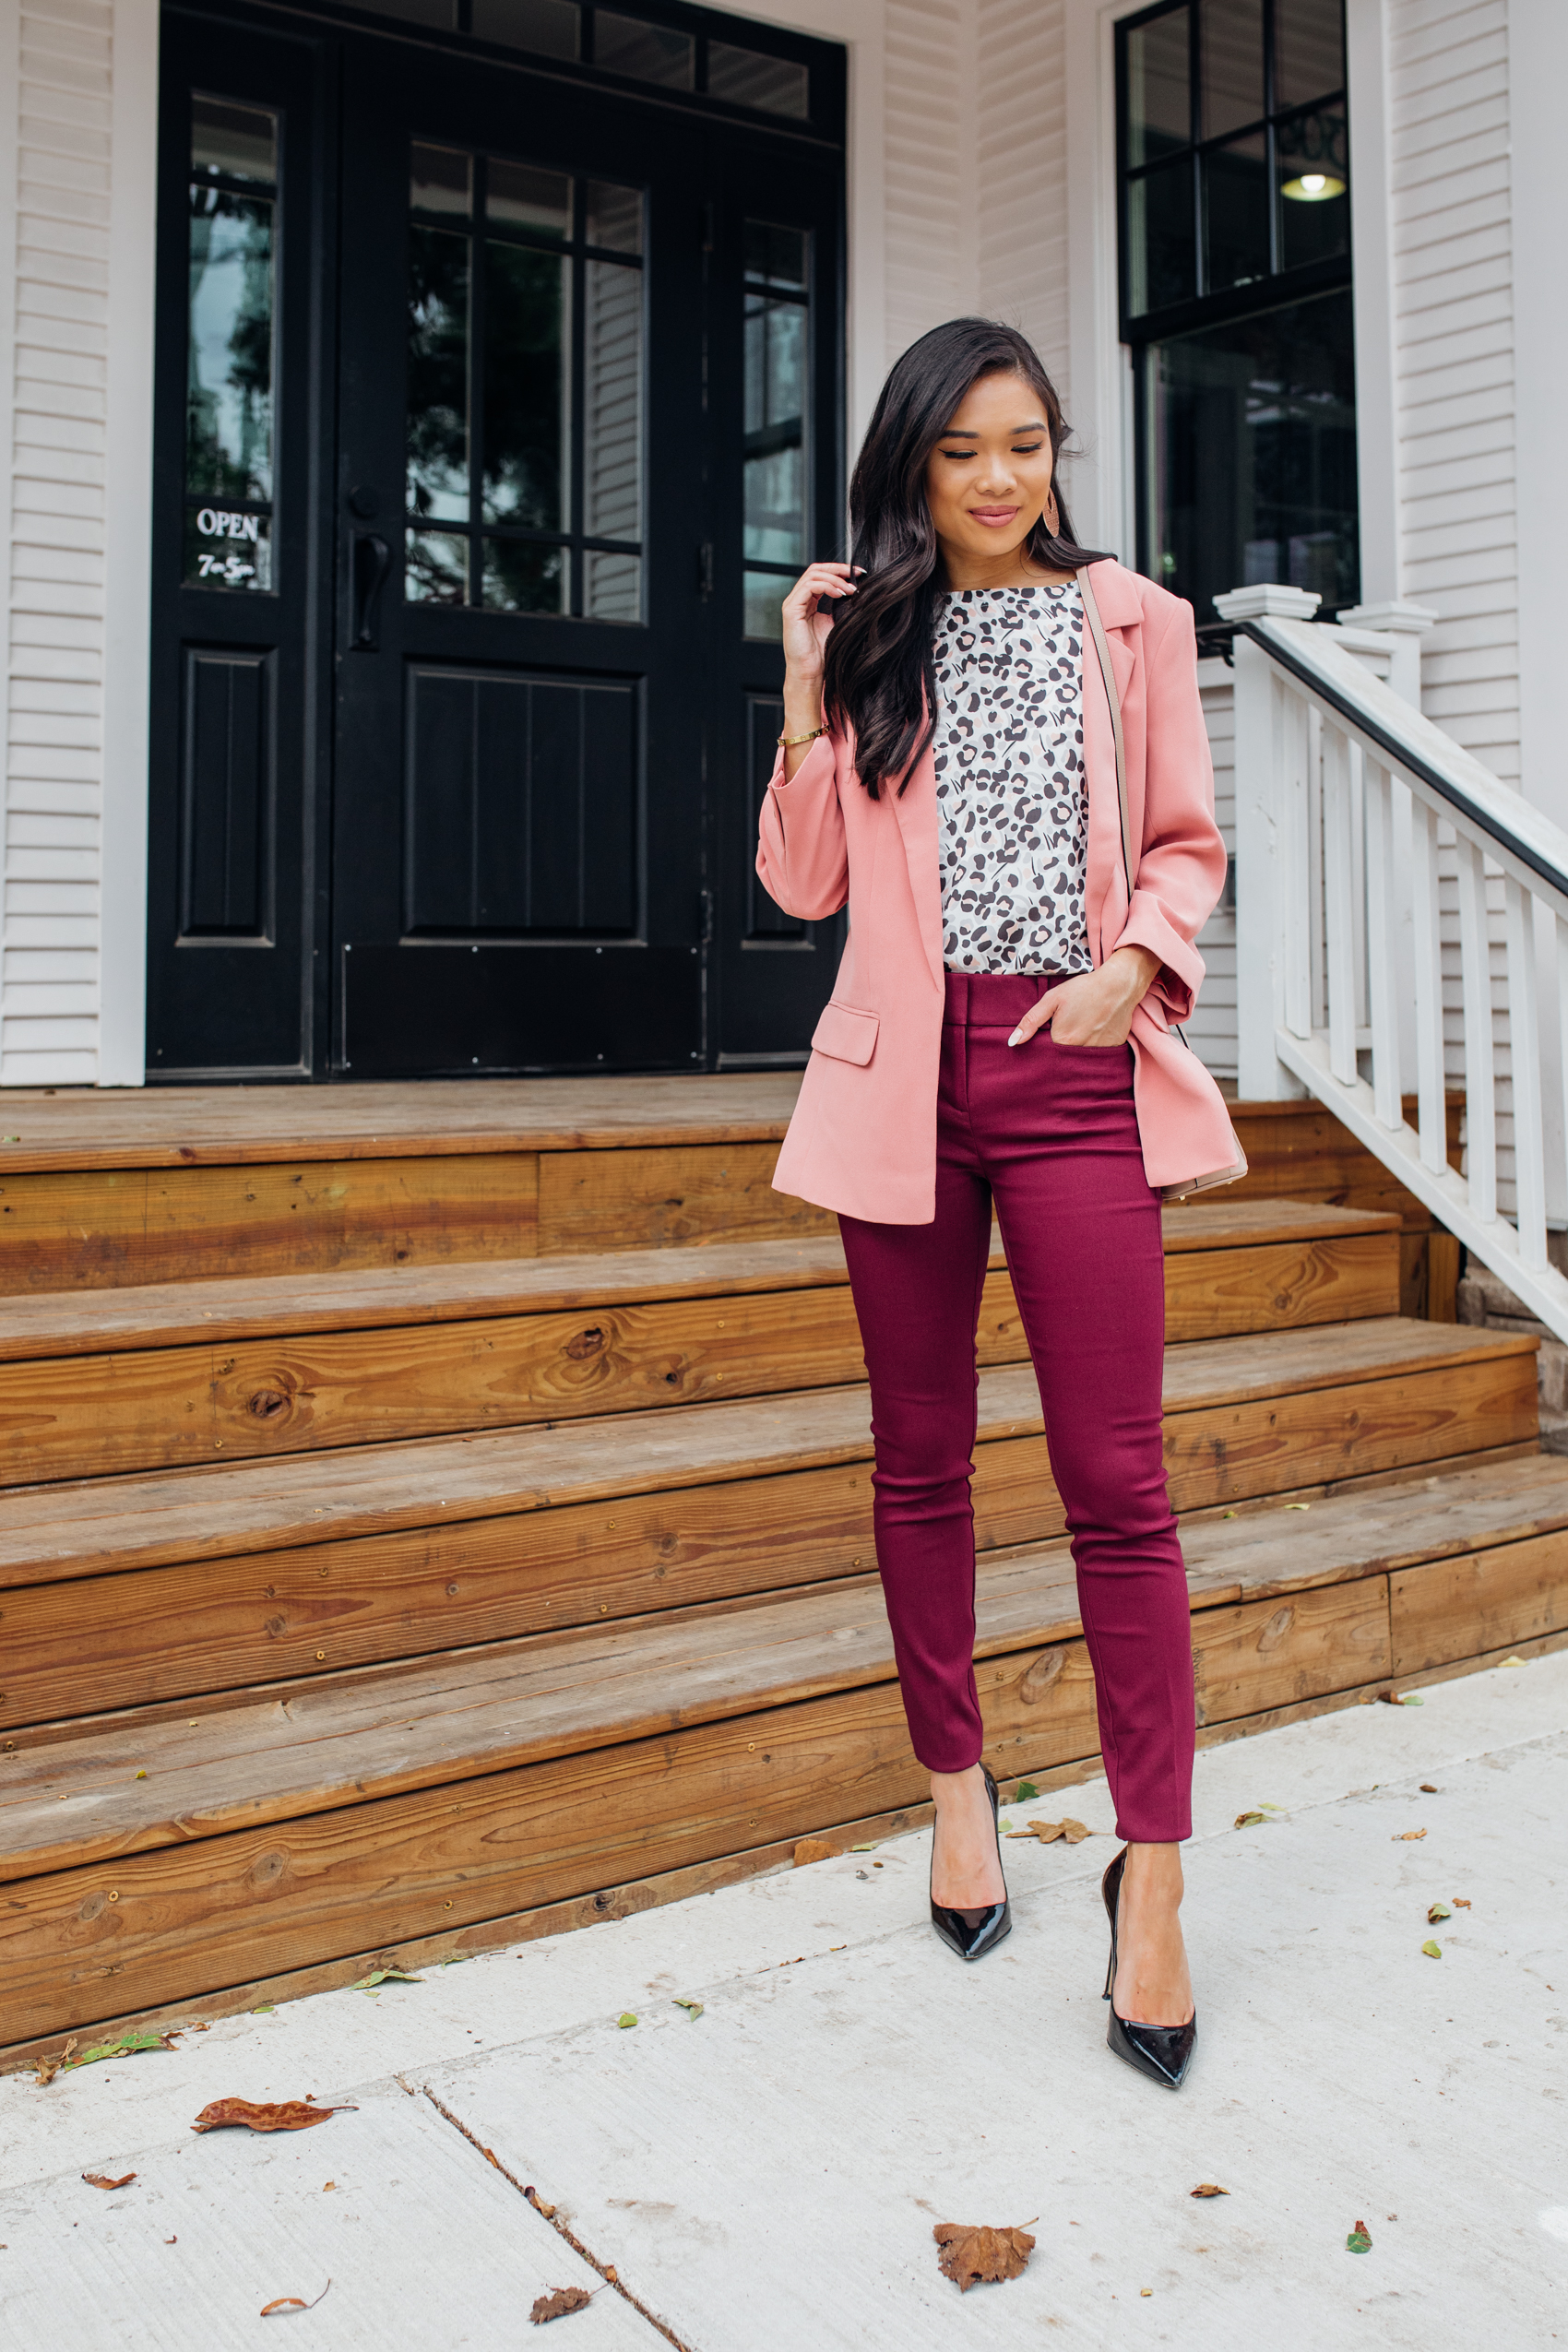 LOFT petite workwear outfits with burgundy pants, leopard print blouse and open blazer